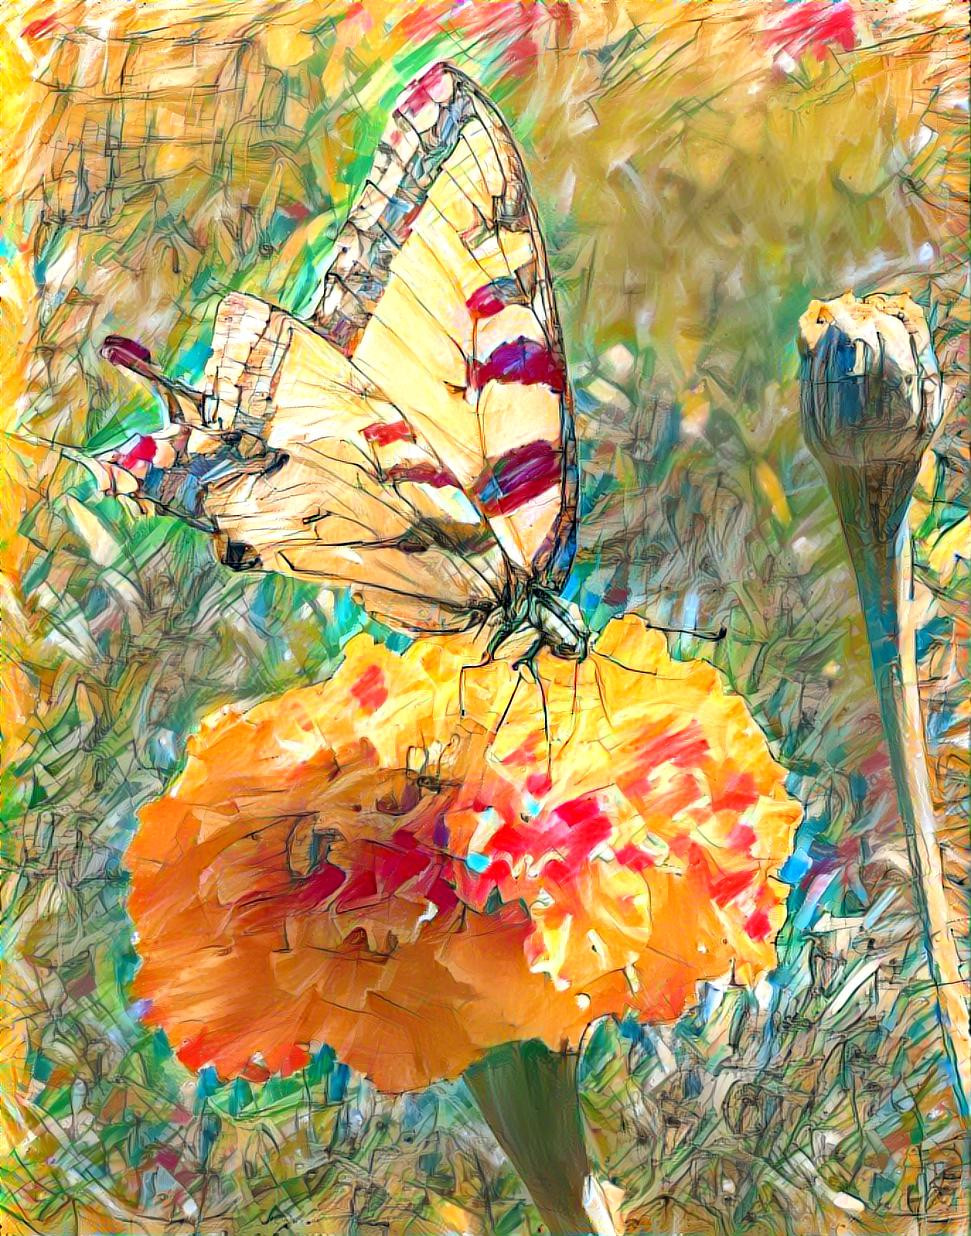 Swallowtail butterfly on marigold